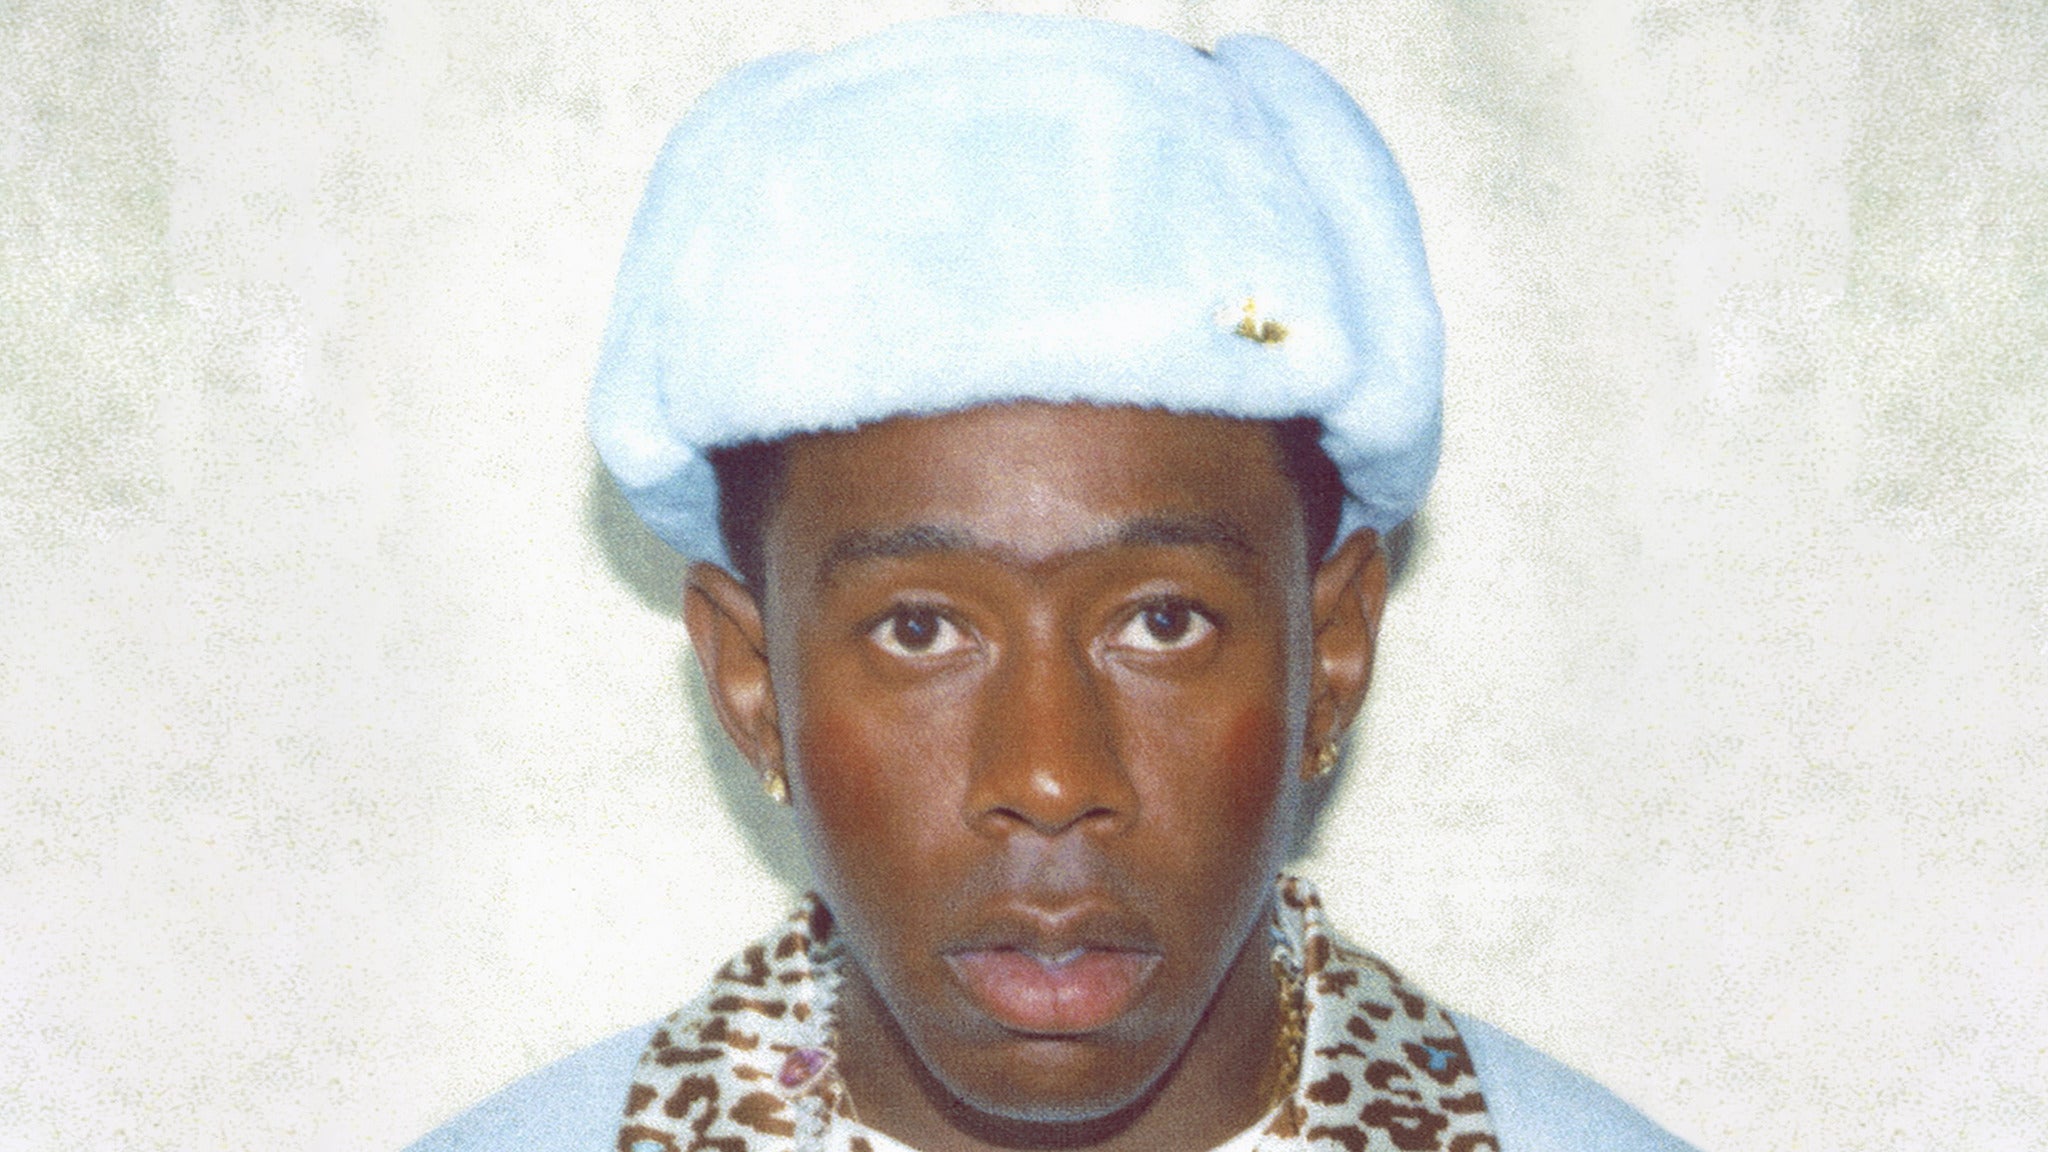 Image used with permission from Ticketmaster | Tyler The Creator tickets